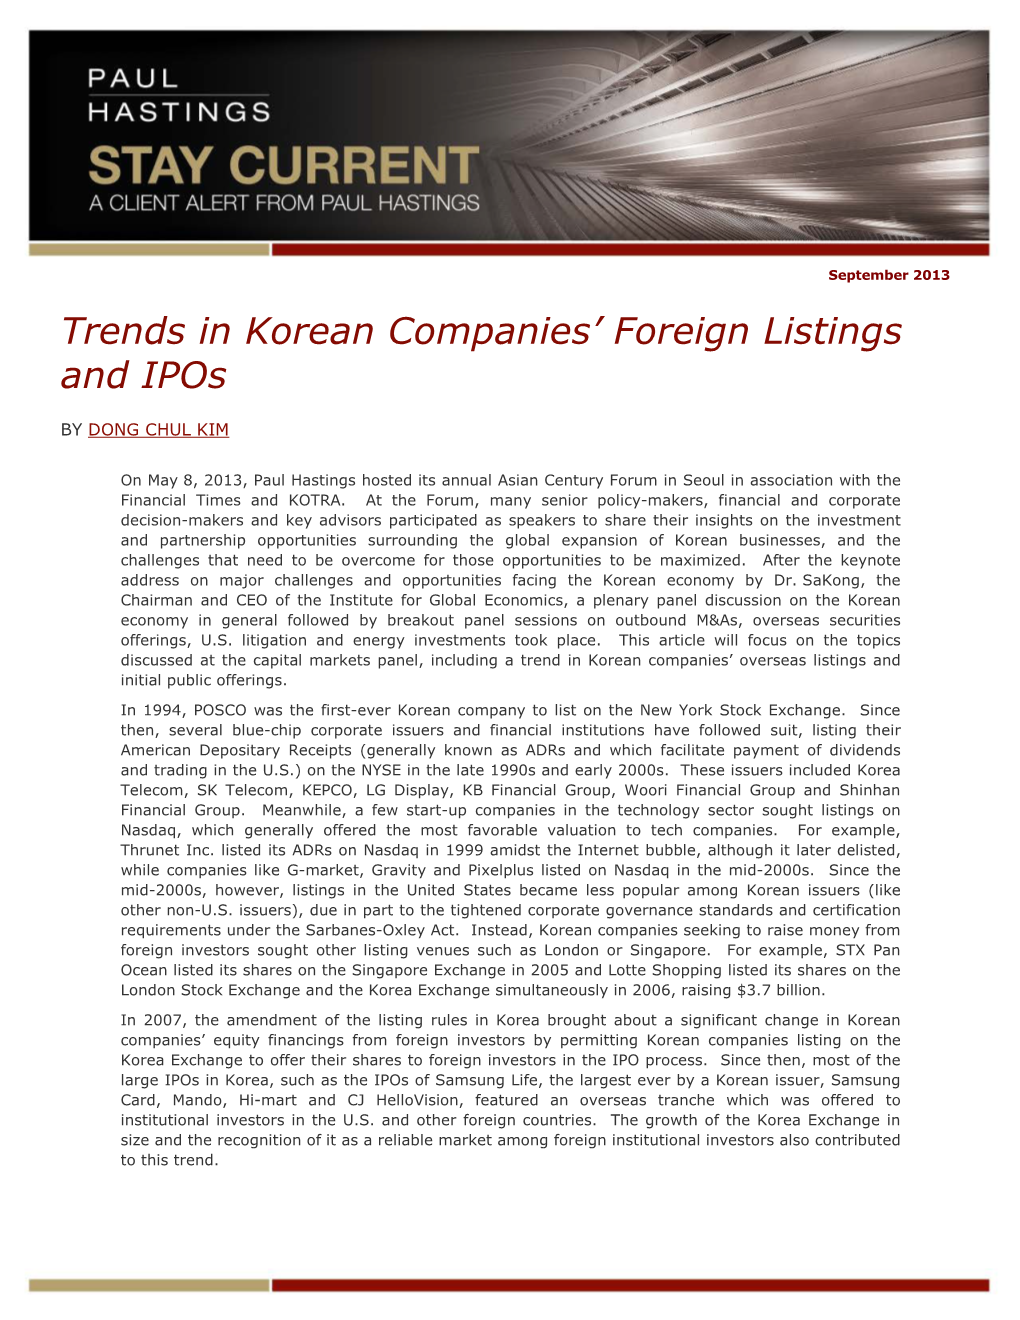 Trends in Korean Companies' Foreign Listings And